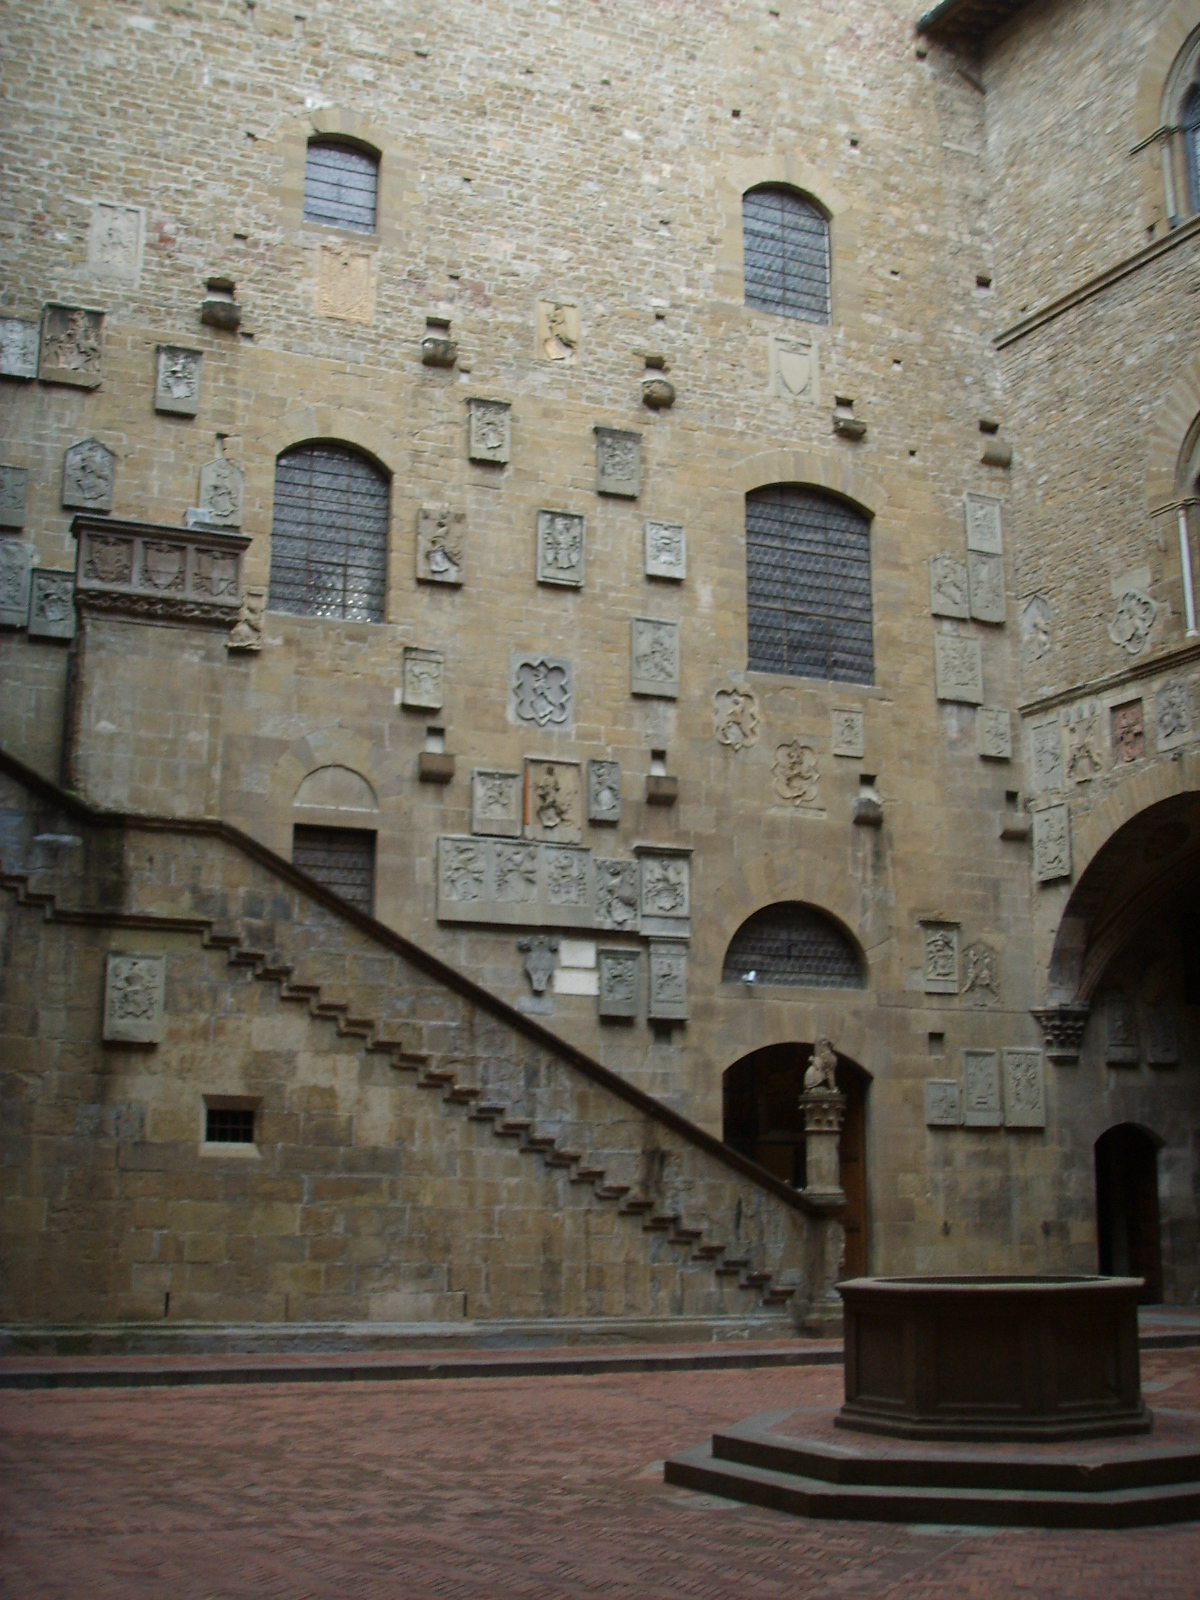 The courtyard of Bargello Museum